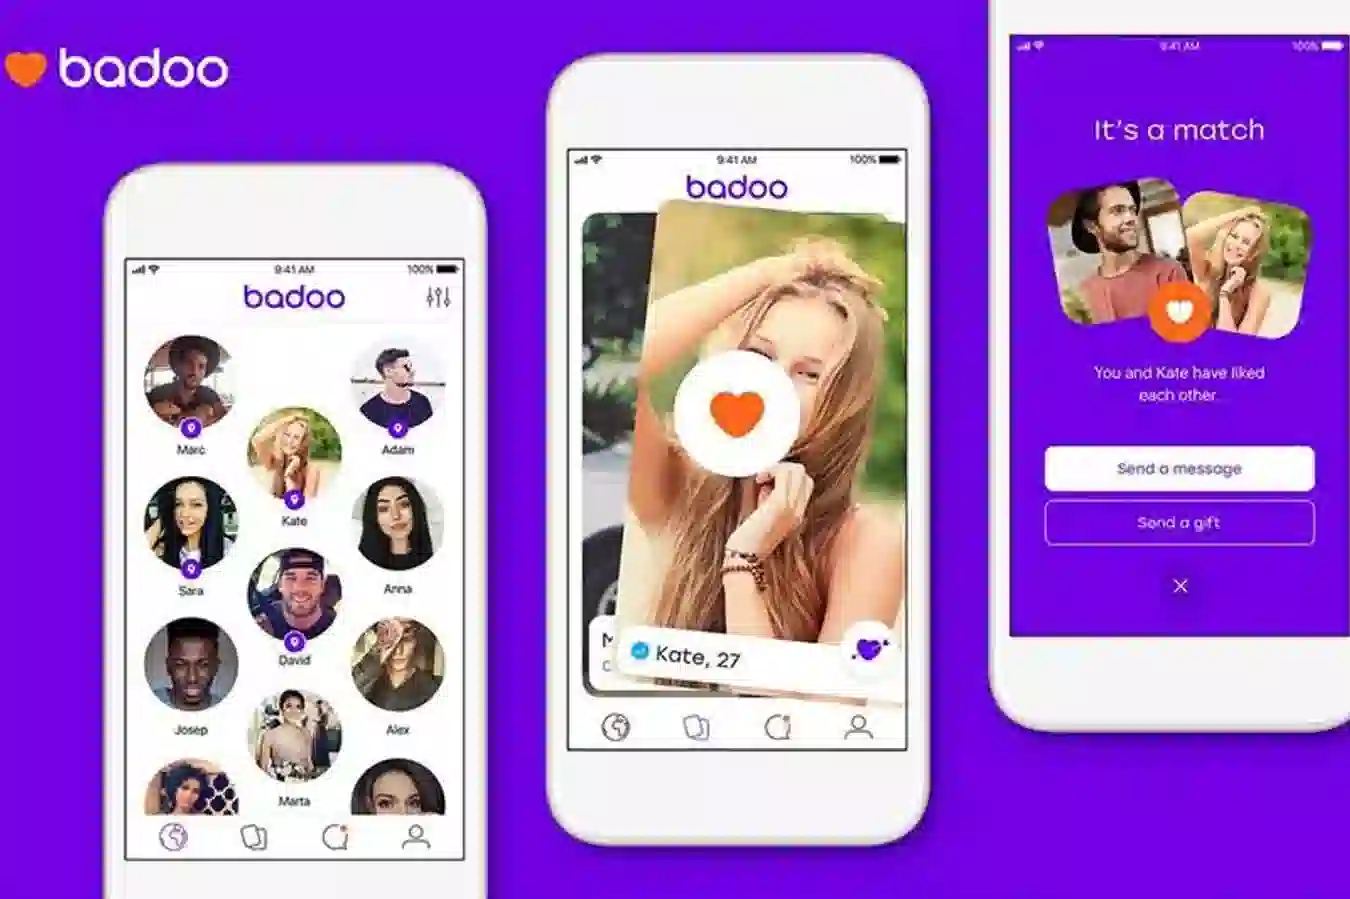 Badoo- Top popular dating apps on the market right now